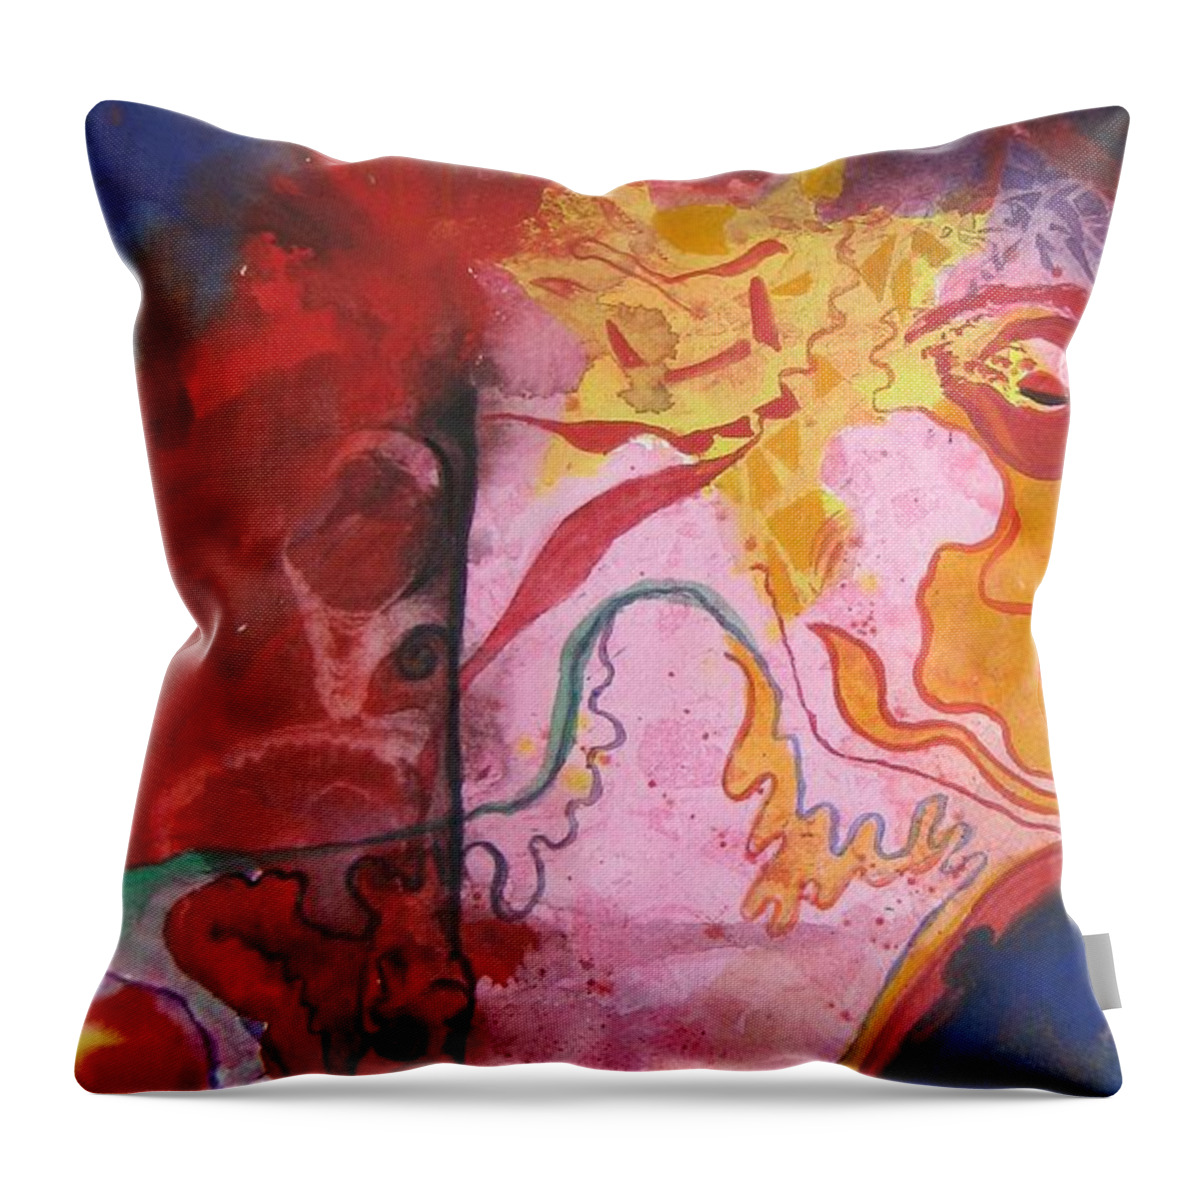  Throw Pillow featuring the painting Dreamscape by Diana Bursztein